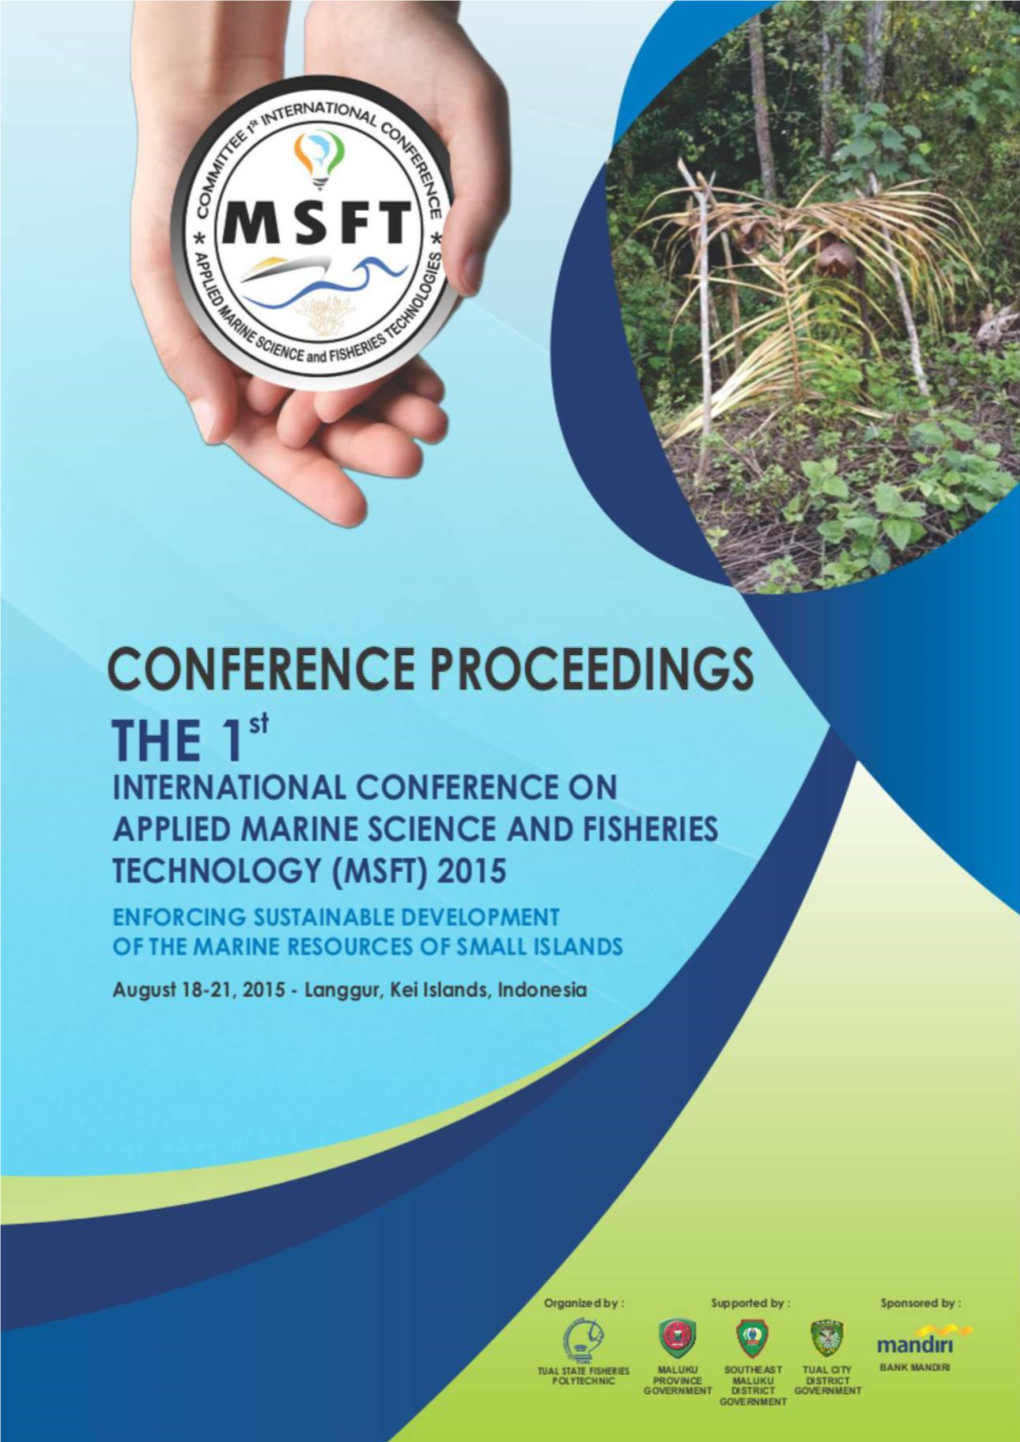 International Conference on Applied Marine Science and Fisheries Technology (MSFT) 2015